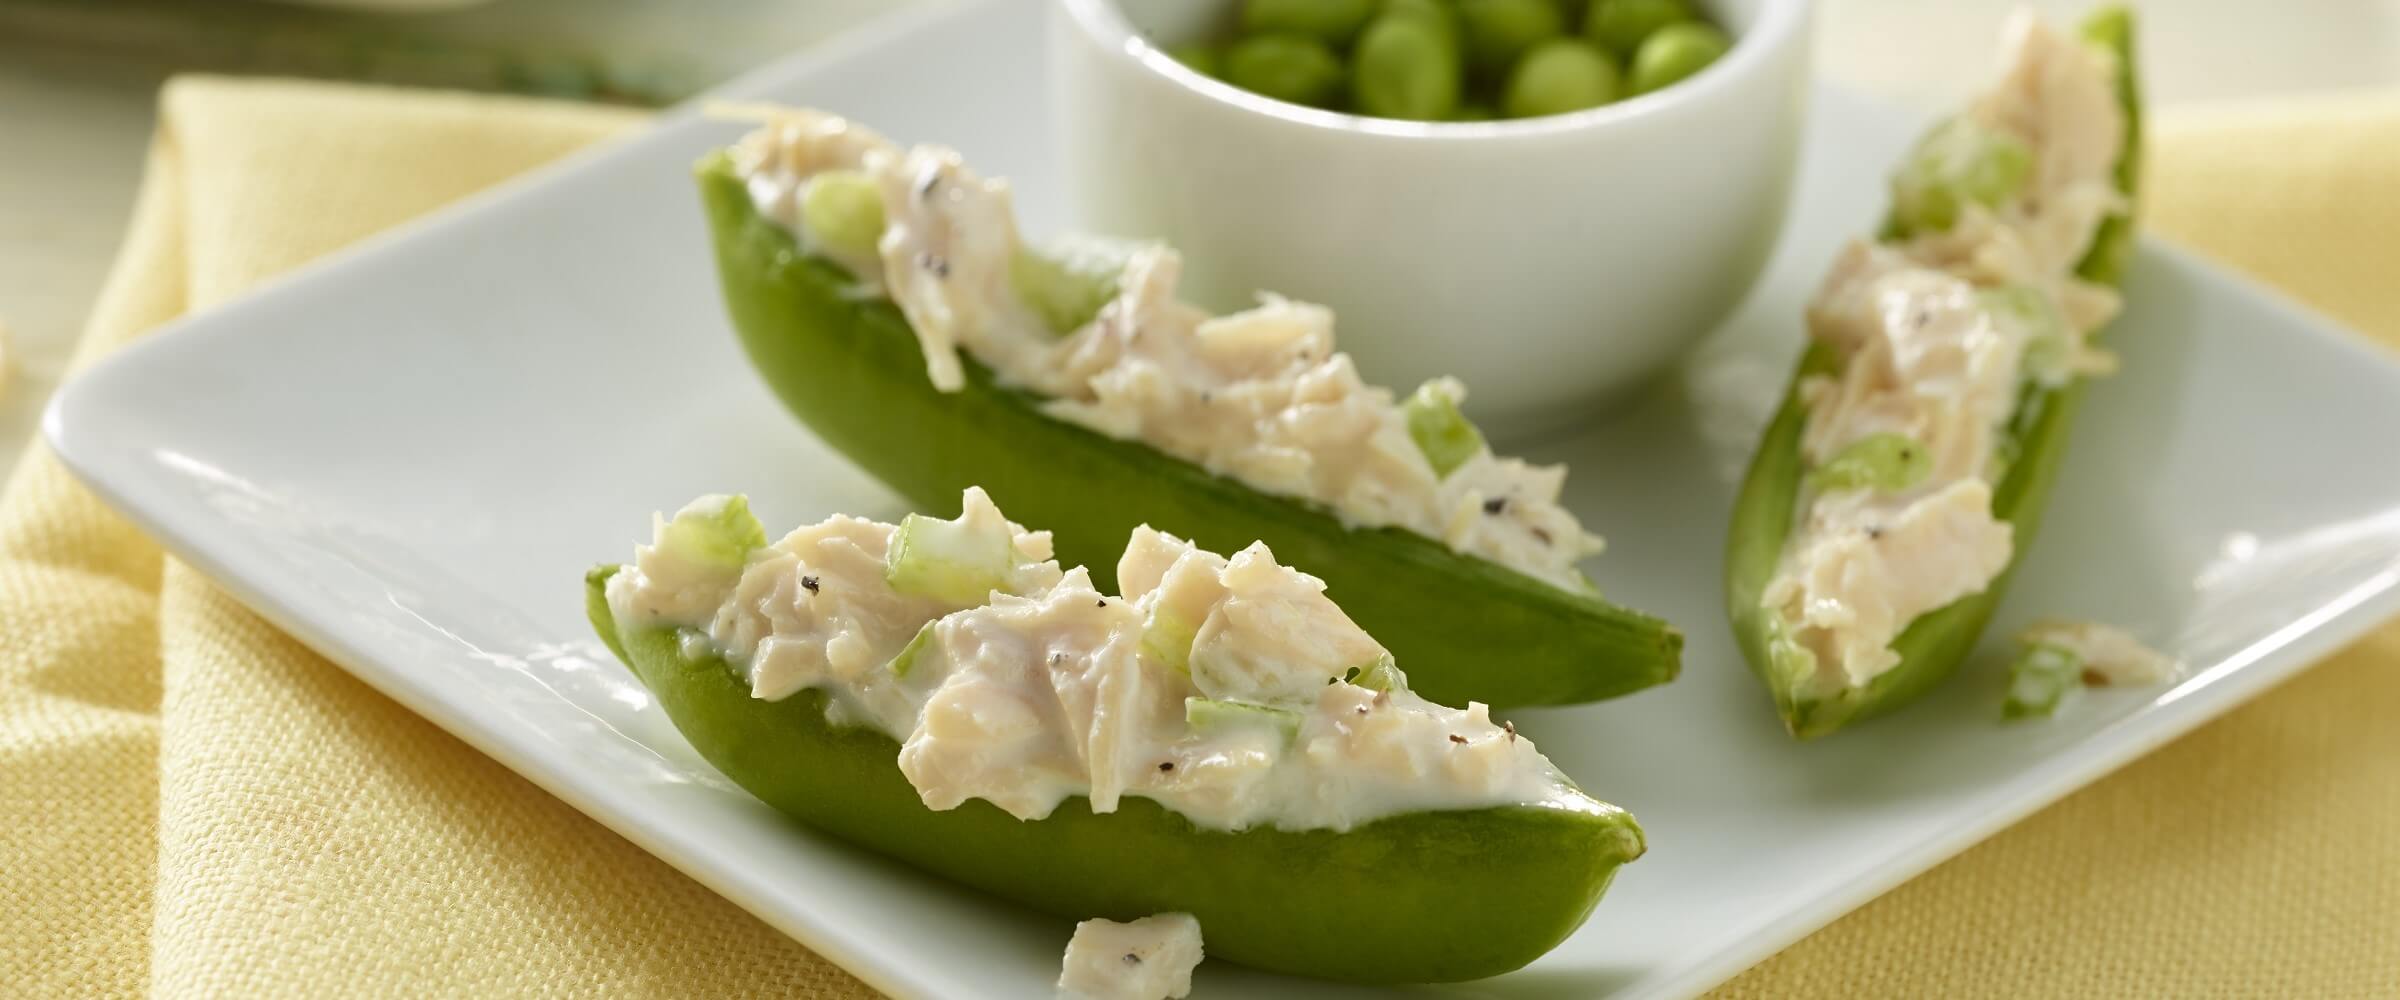 Best Snap Pea and Chicken Salad Recipe - How To Make Snap Pea and